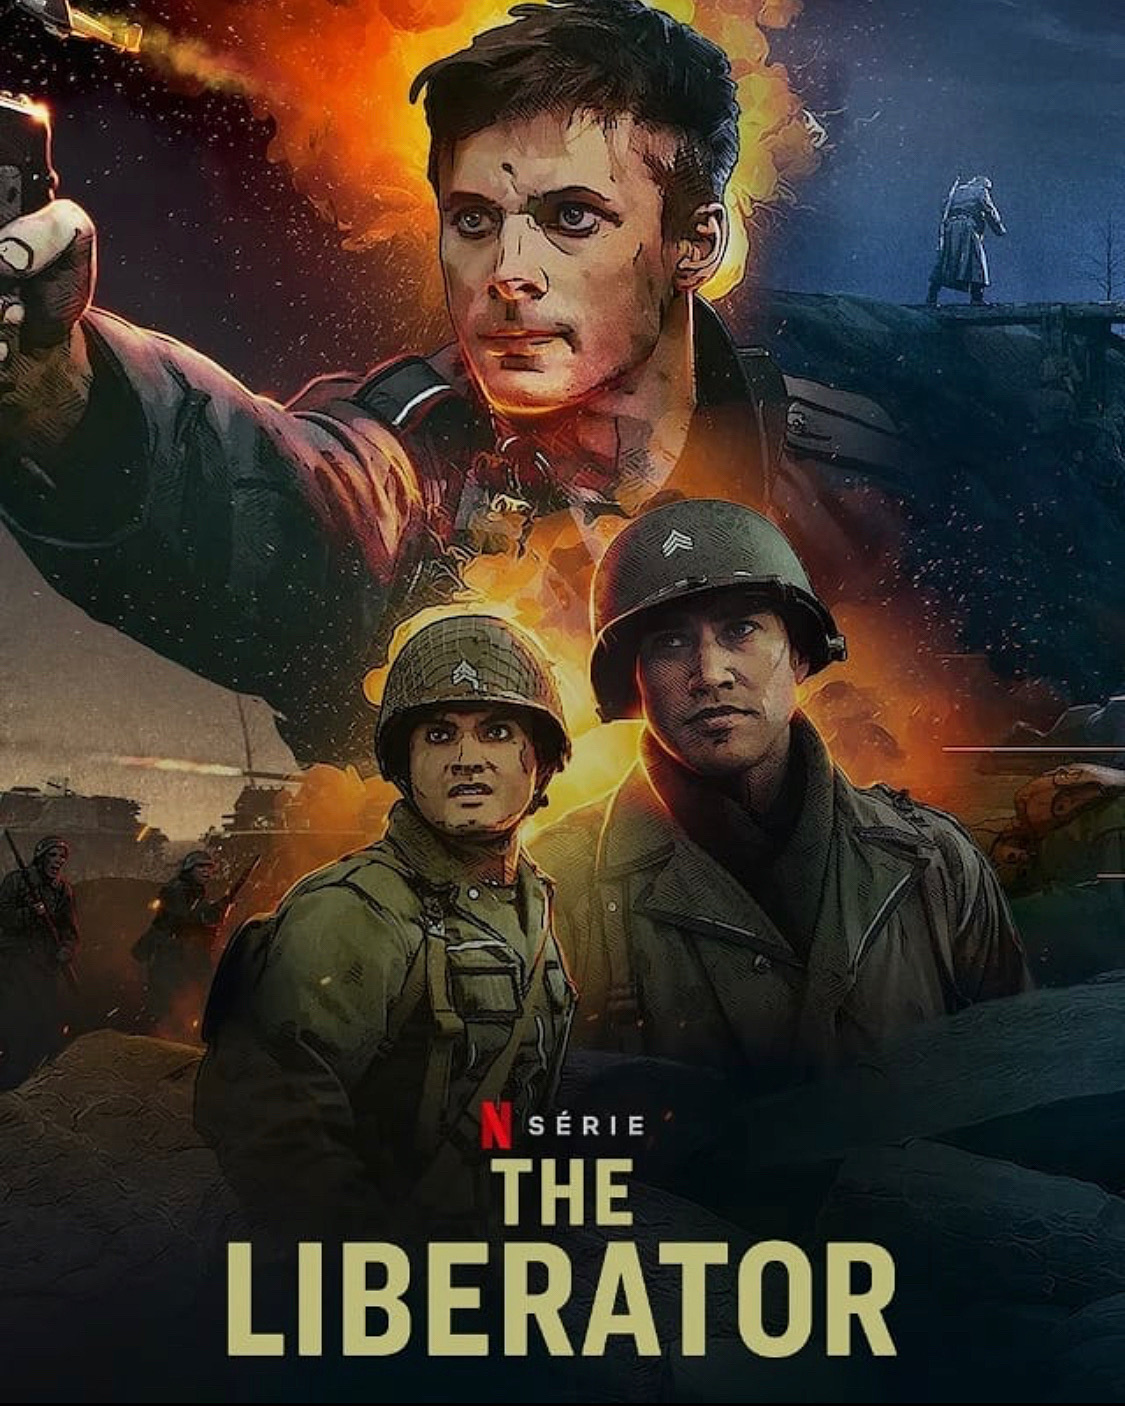 The Liberator Limited Series on Netflix